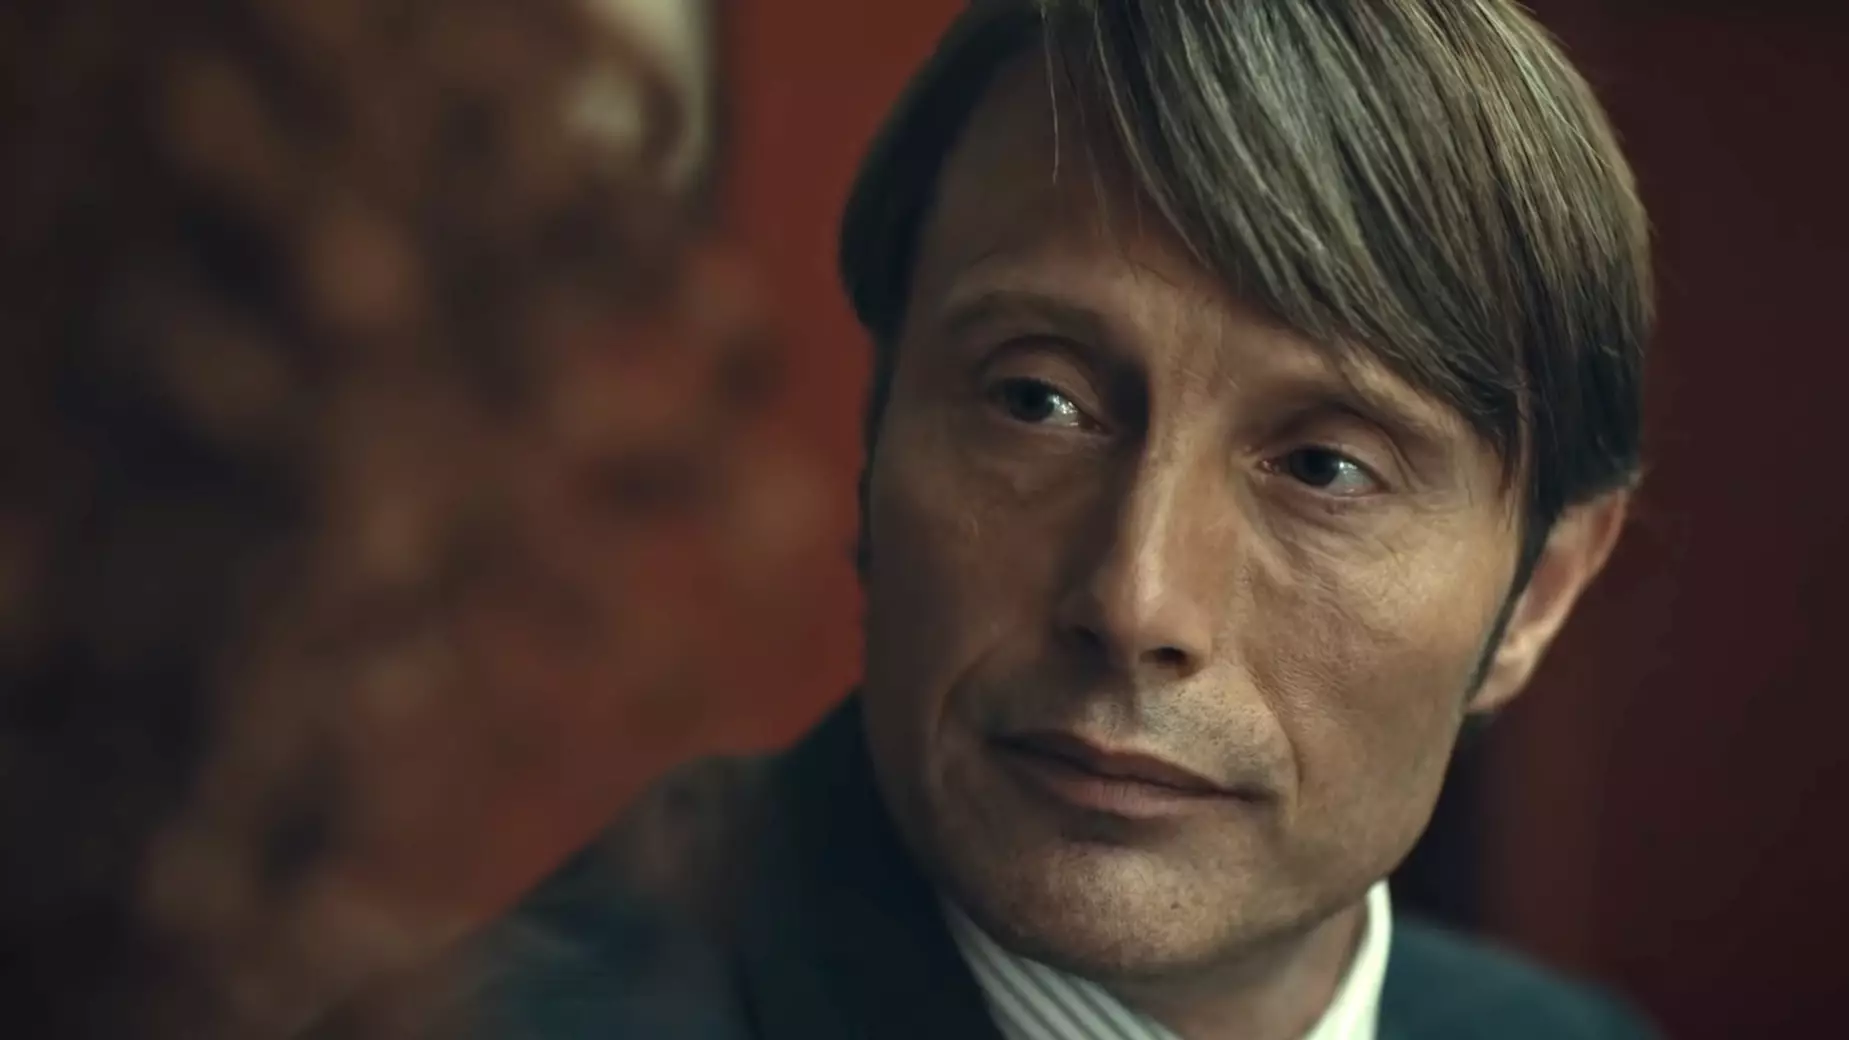 Fantastic Beasts 3: Mads Mikkelsen Officially Cast As Grindelwald To Replace Johnny Depp